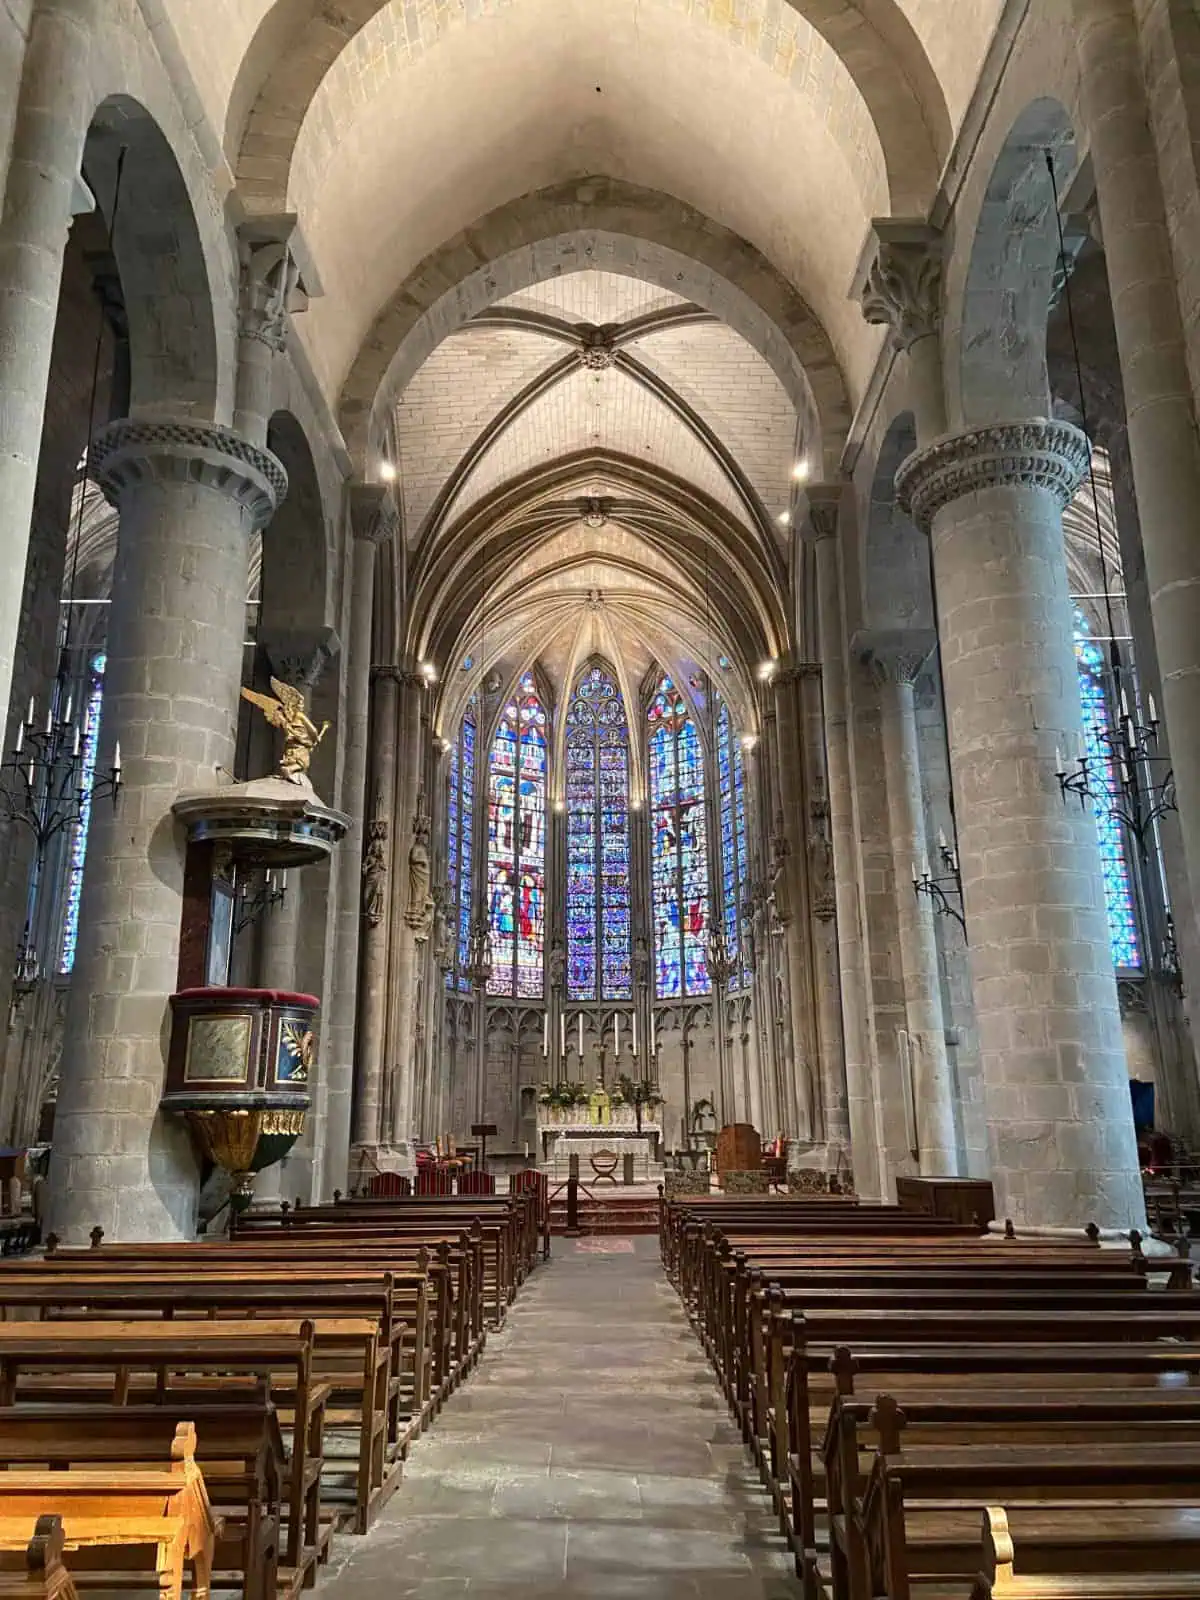 Inside Saint Nazaire Basilica in Carcassonne with the pews and stained glass windows